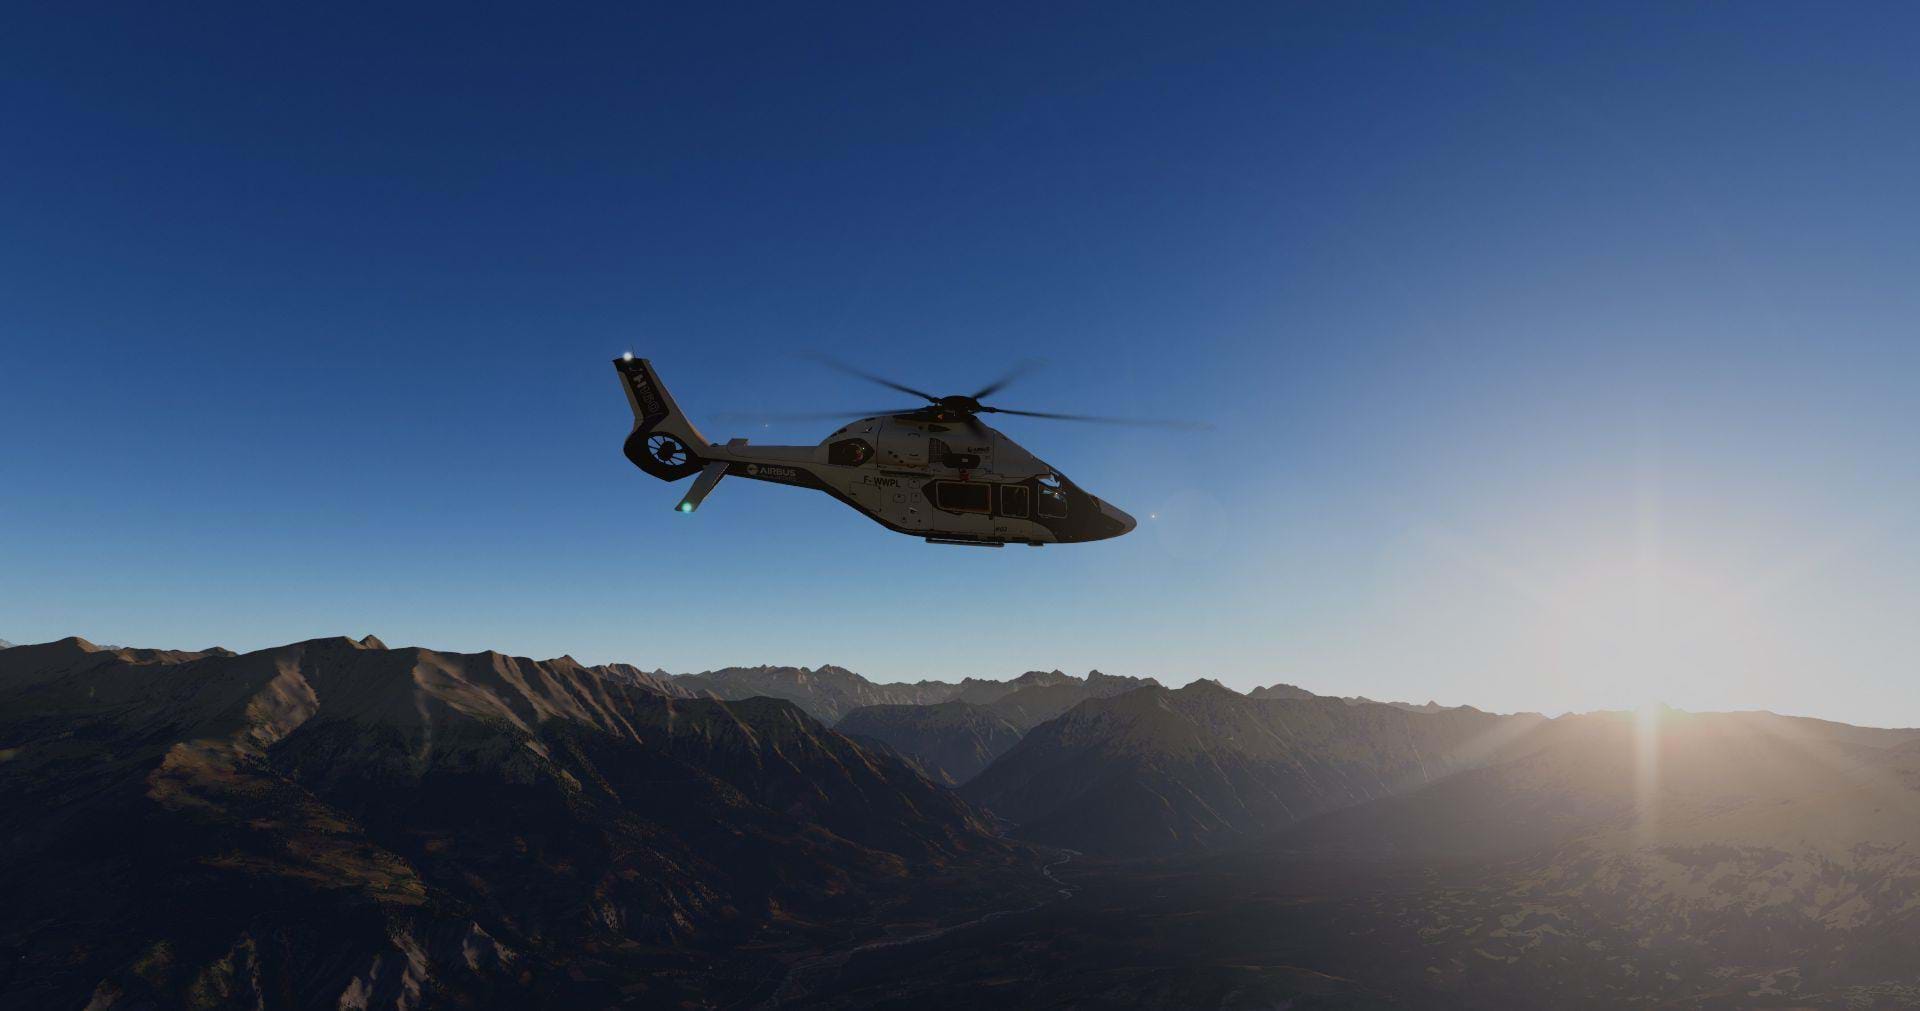 H160 for X-Plane